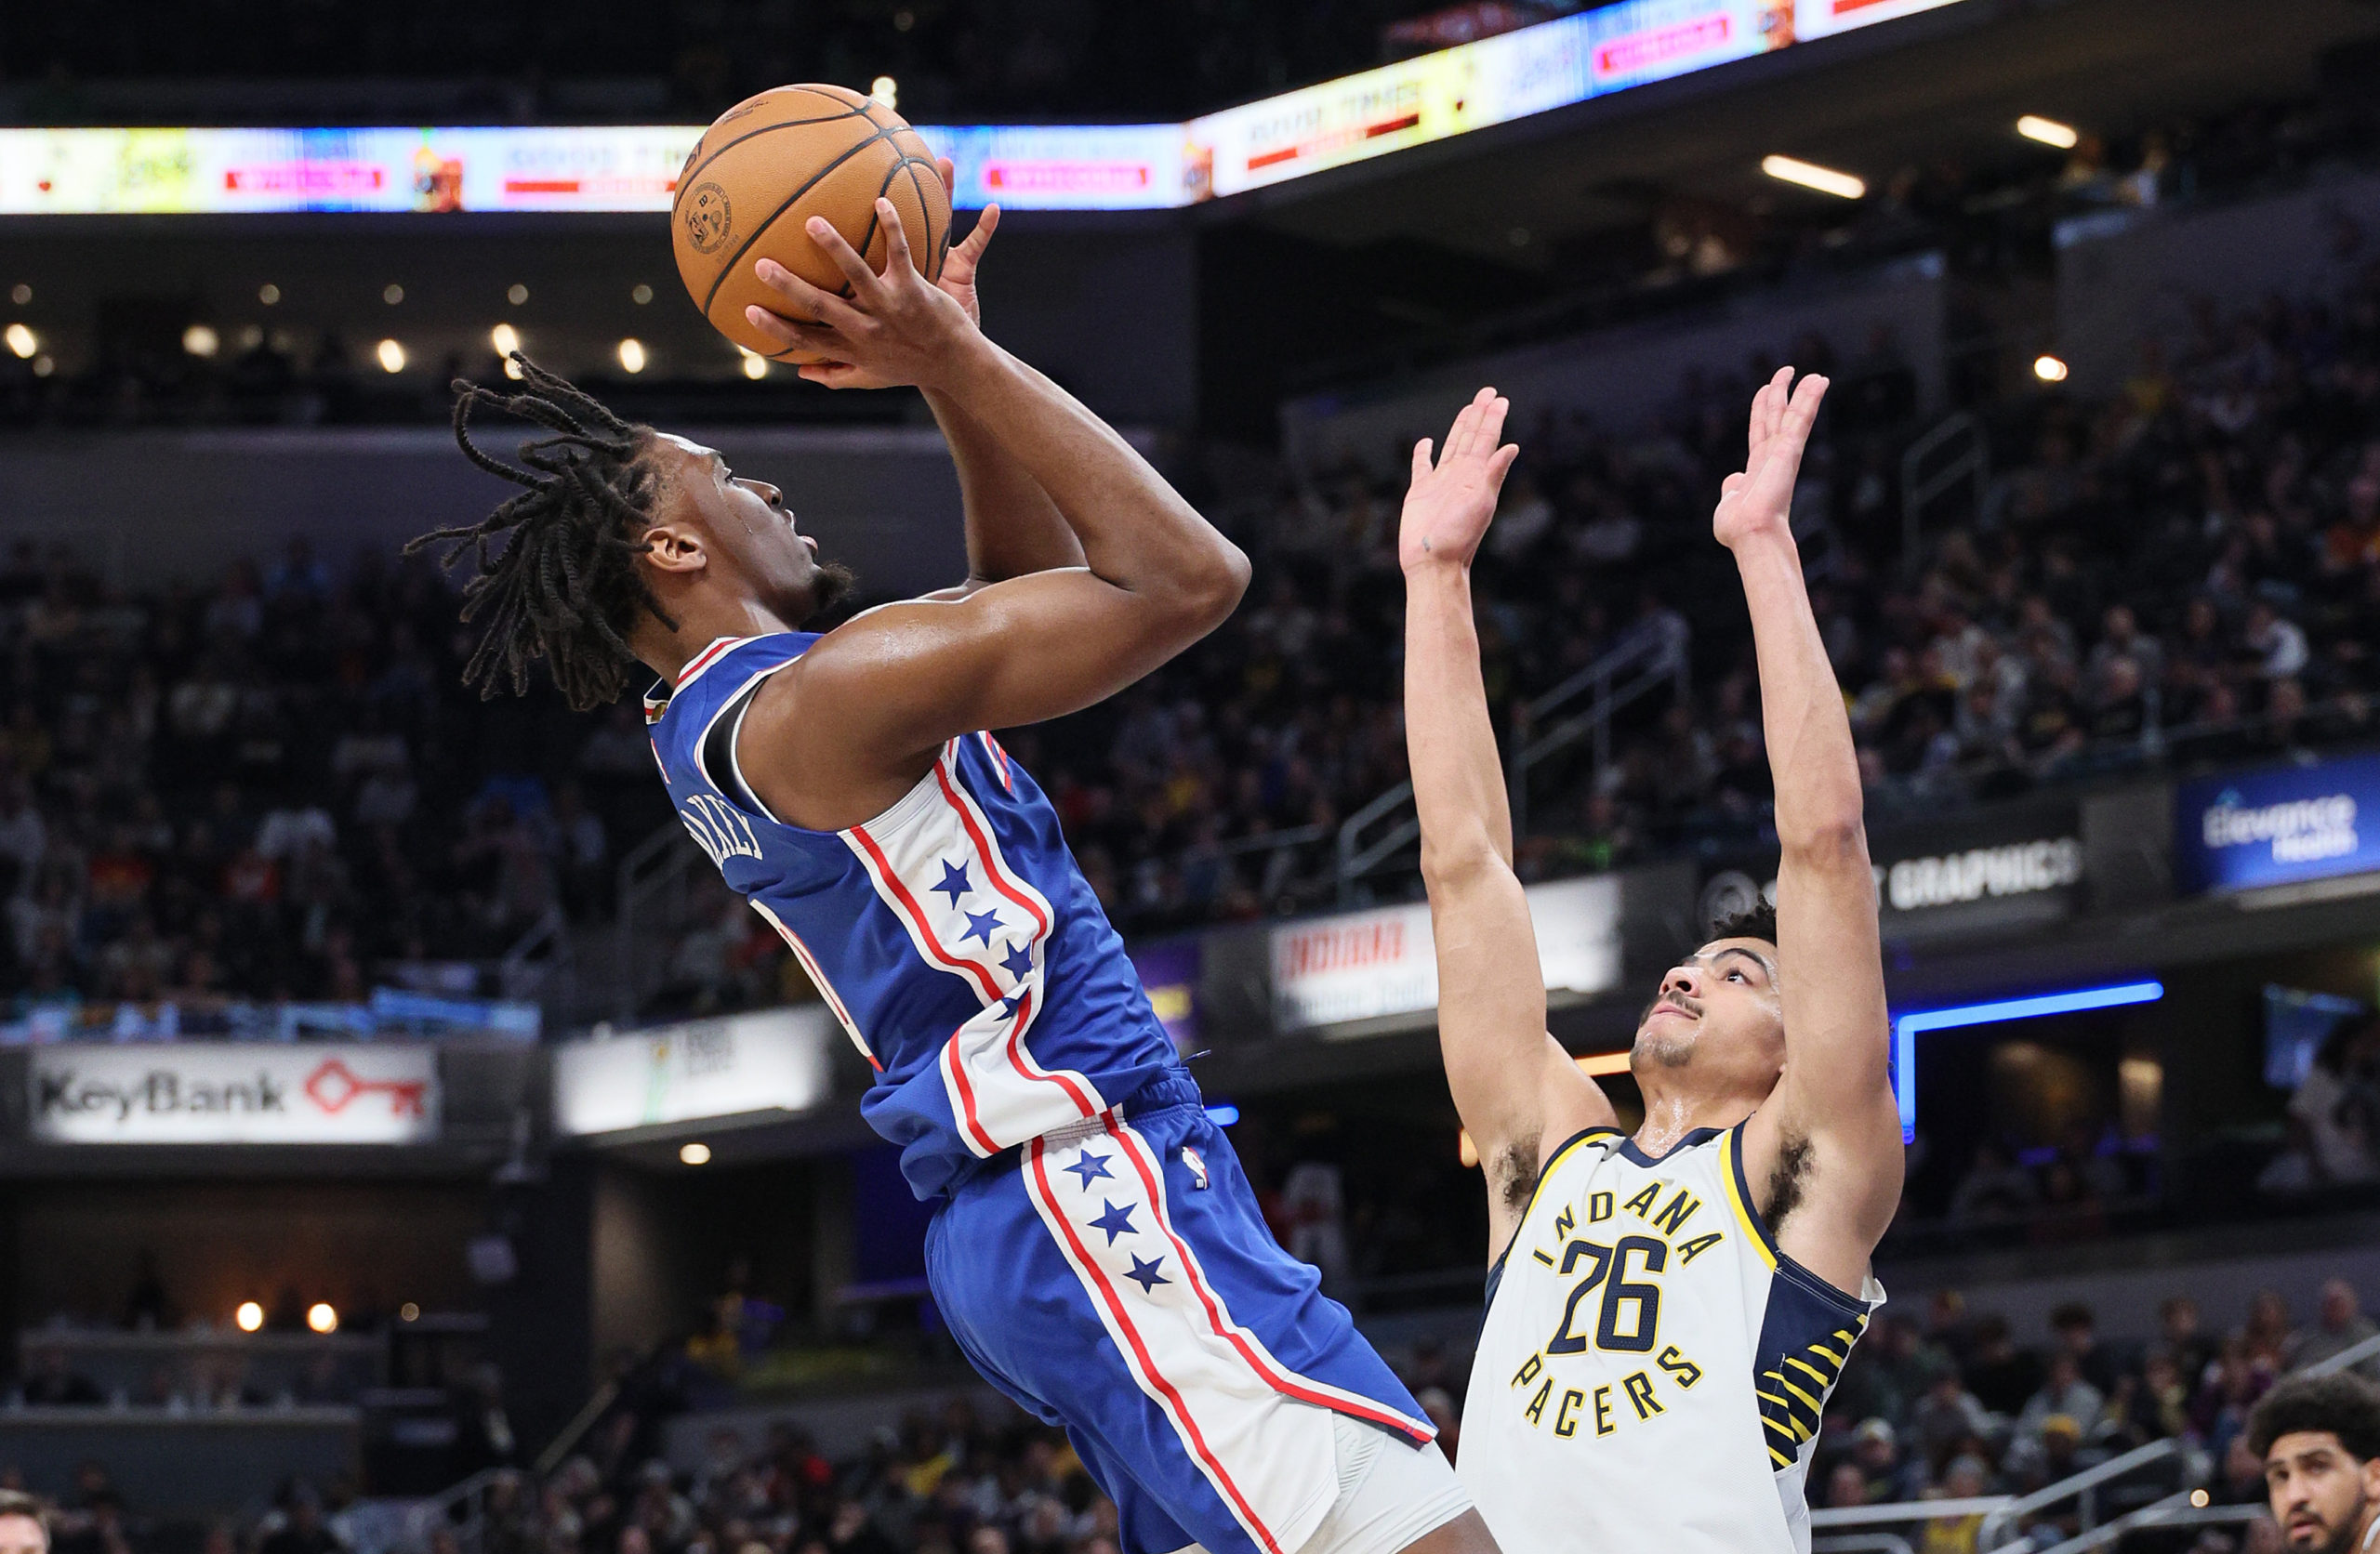 INDIANAPOLIS, INDIANA - JANUARY 25: Tyrese Maxey #0 of the Philadelphia 76ers shoots the ball in the first half while defended by Ben Sheppard #26 of the Indiana Pacers at Gainbridge Fieldhouse on January 25, 2024 in Indianapolis, Indiana. Andy Lyons/Getty Images